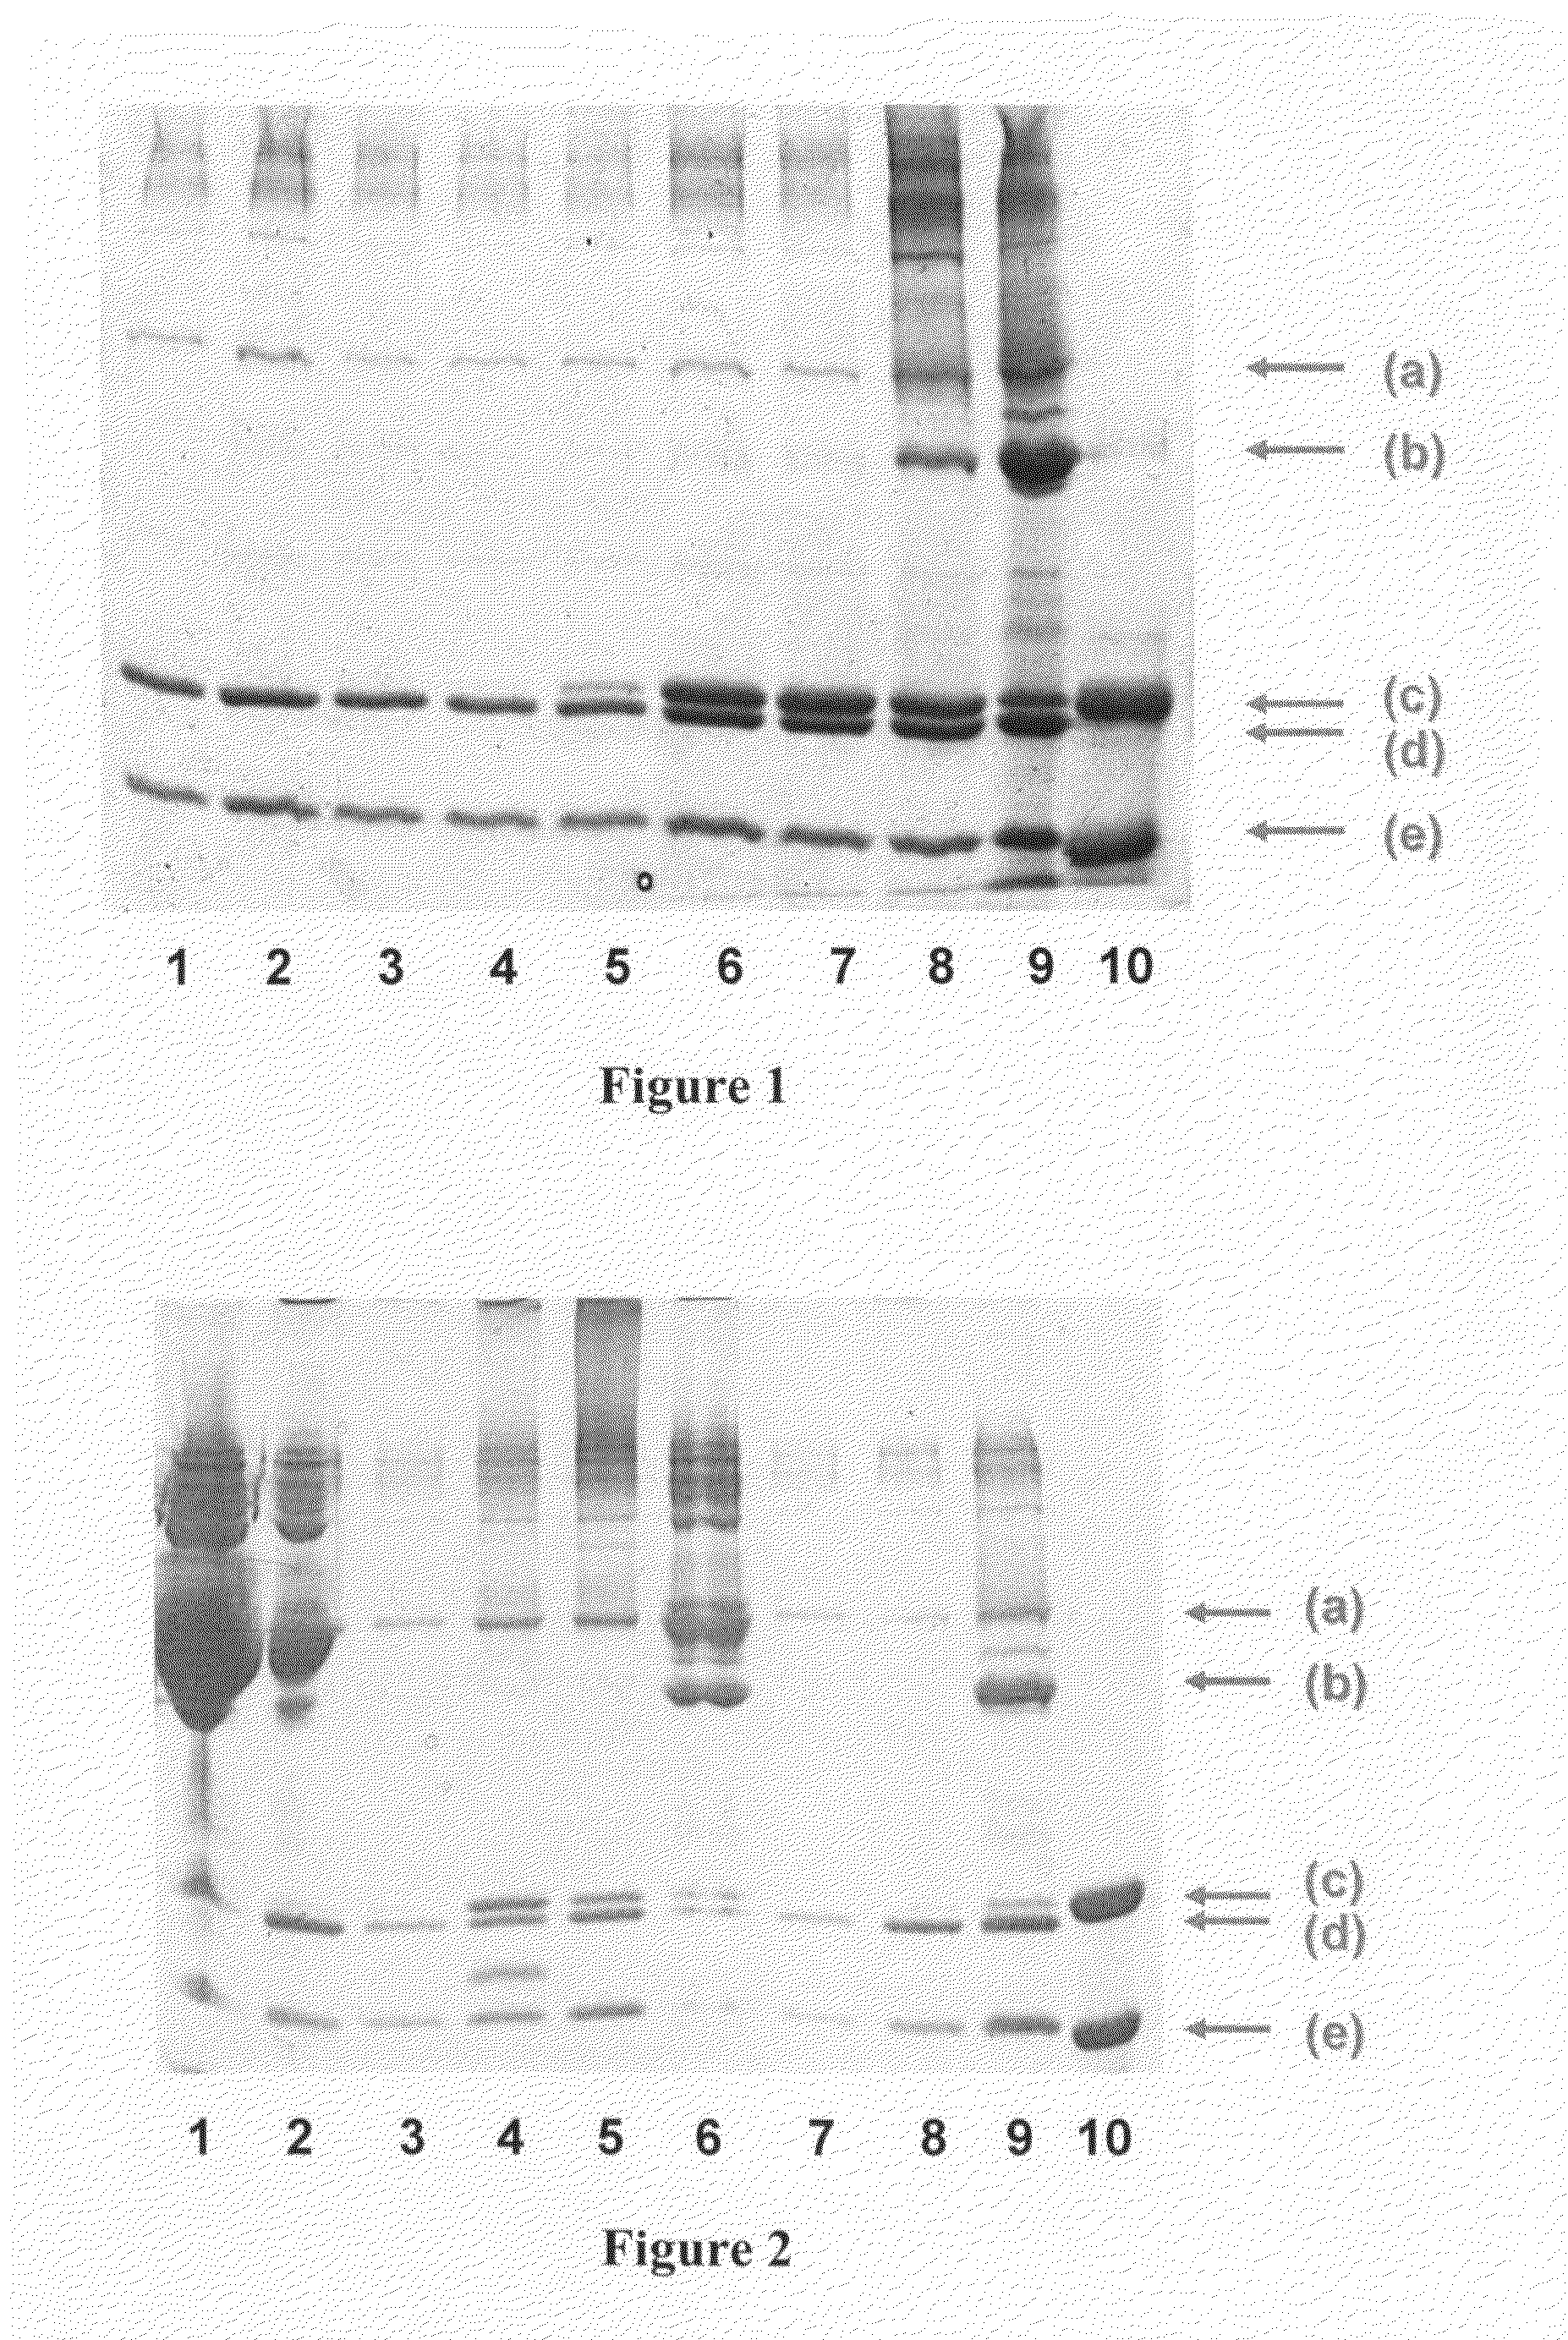 Method for Concentrating, Purifying and Removing Prion Protein